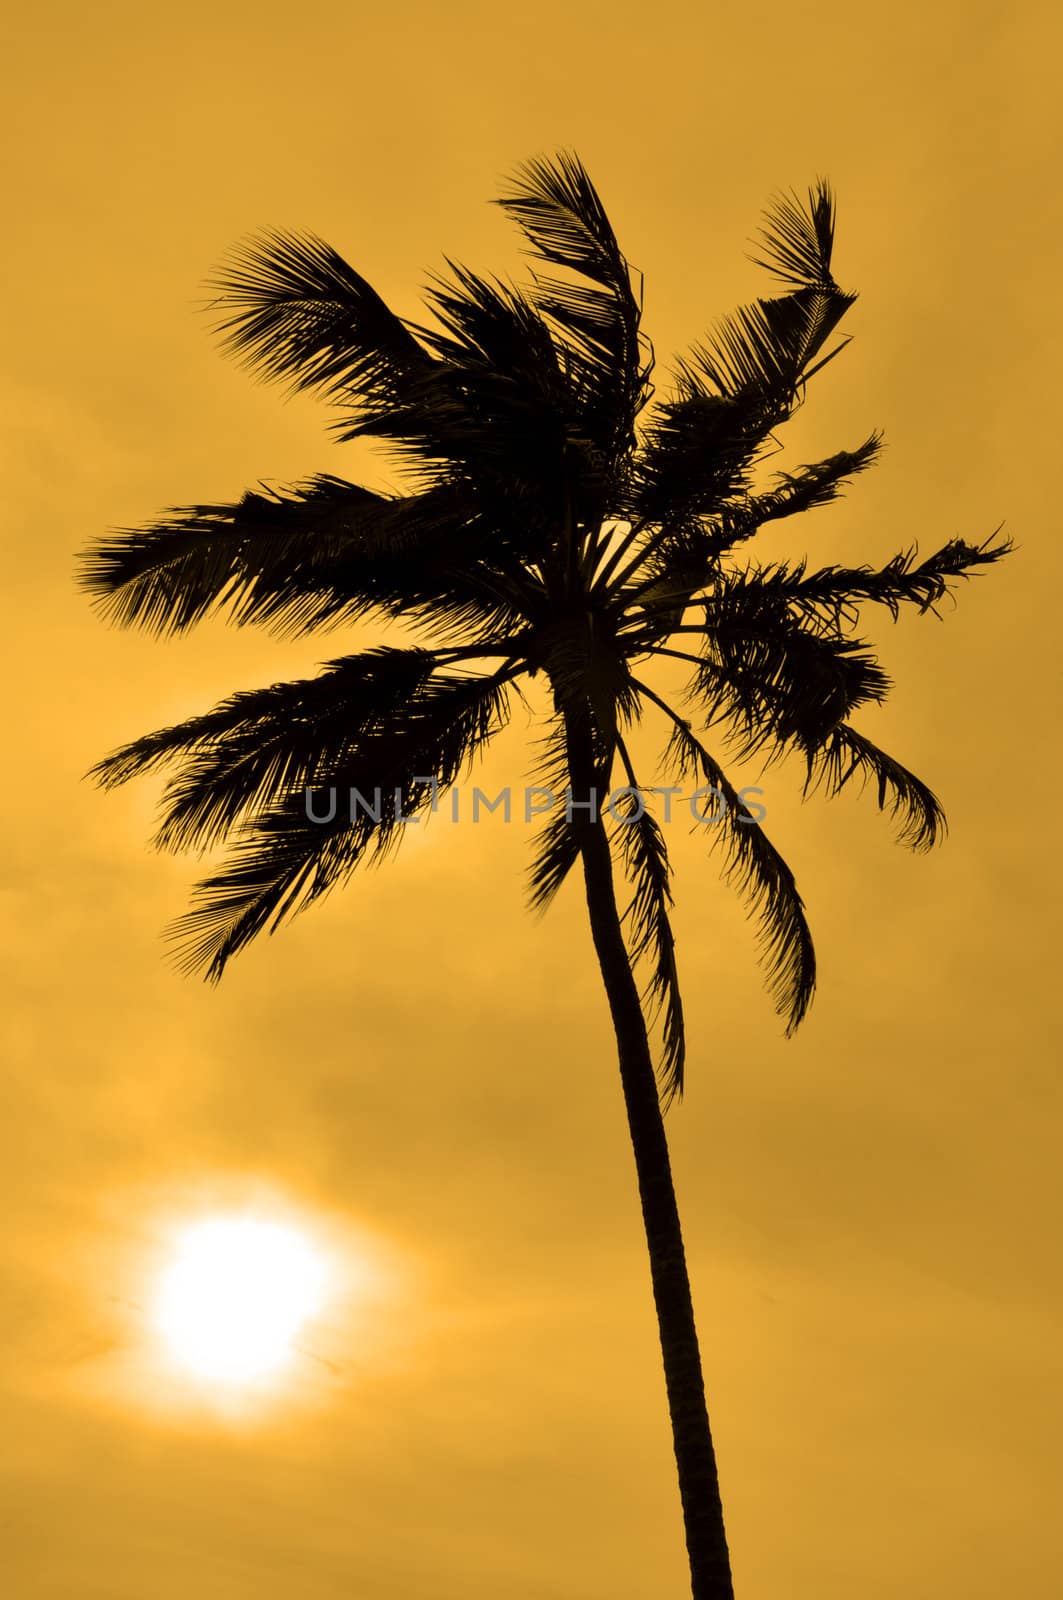 The Silhouette of a Palm tree against the sun on a windy day